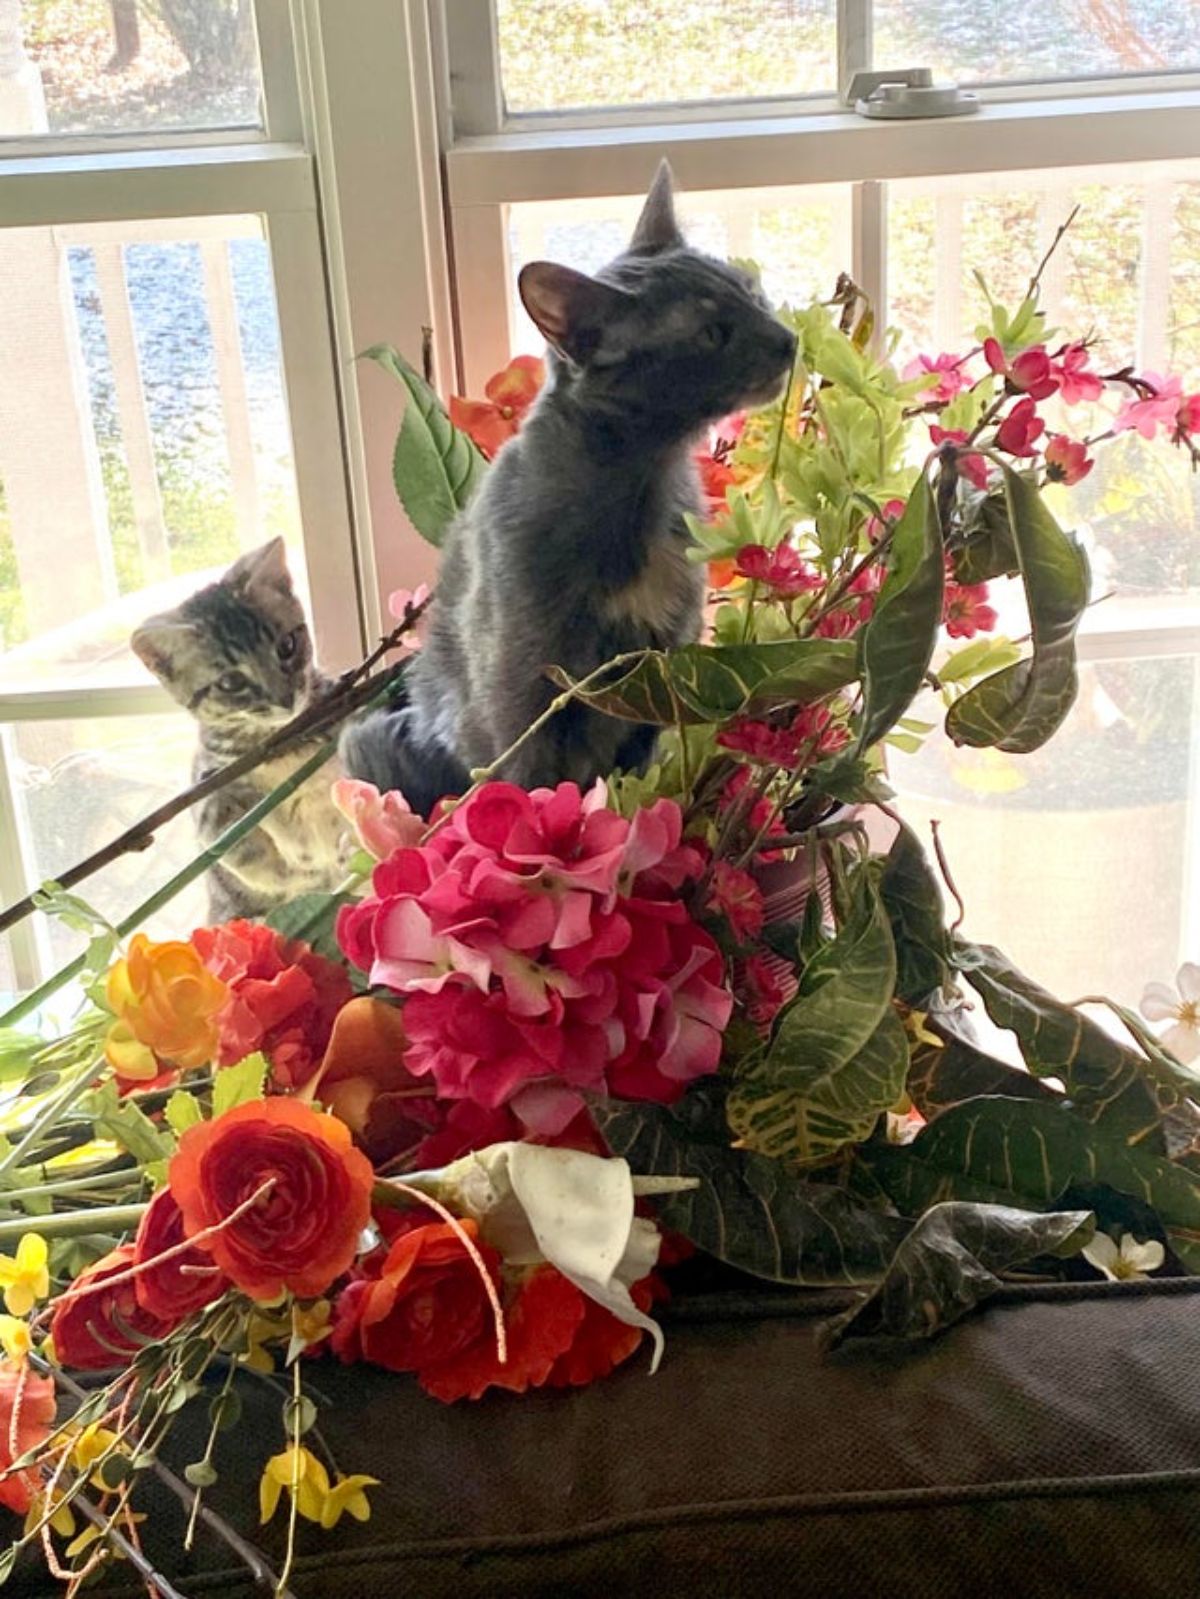 grey and white kitten and grey and white tabby kitten breaking apart a bouquet and vase of flowers